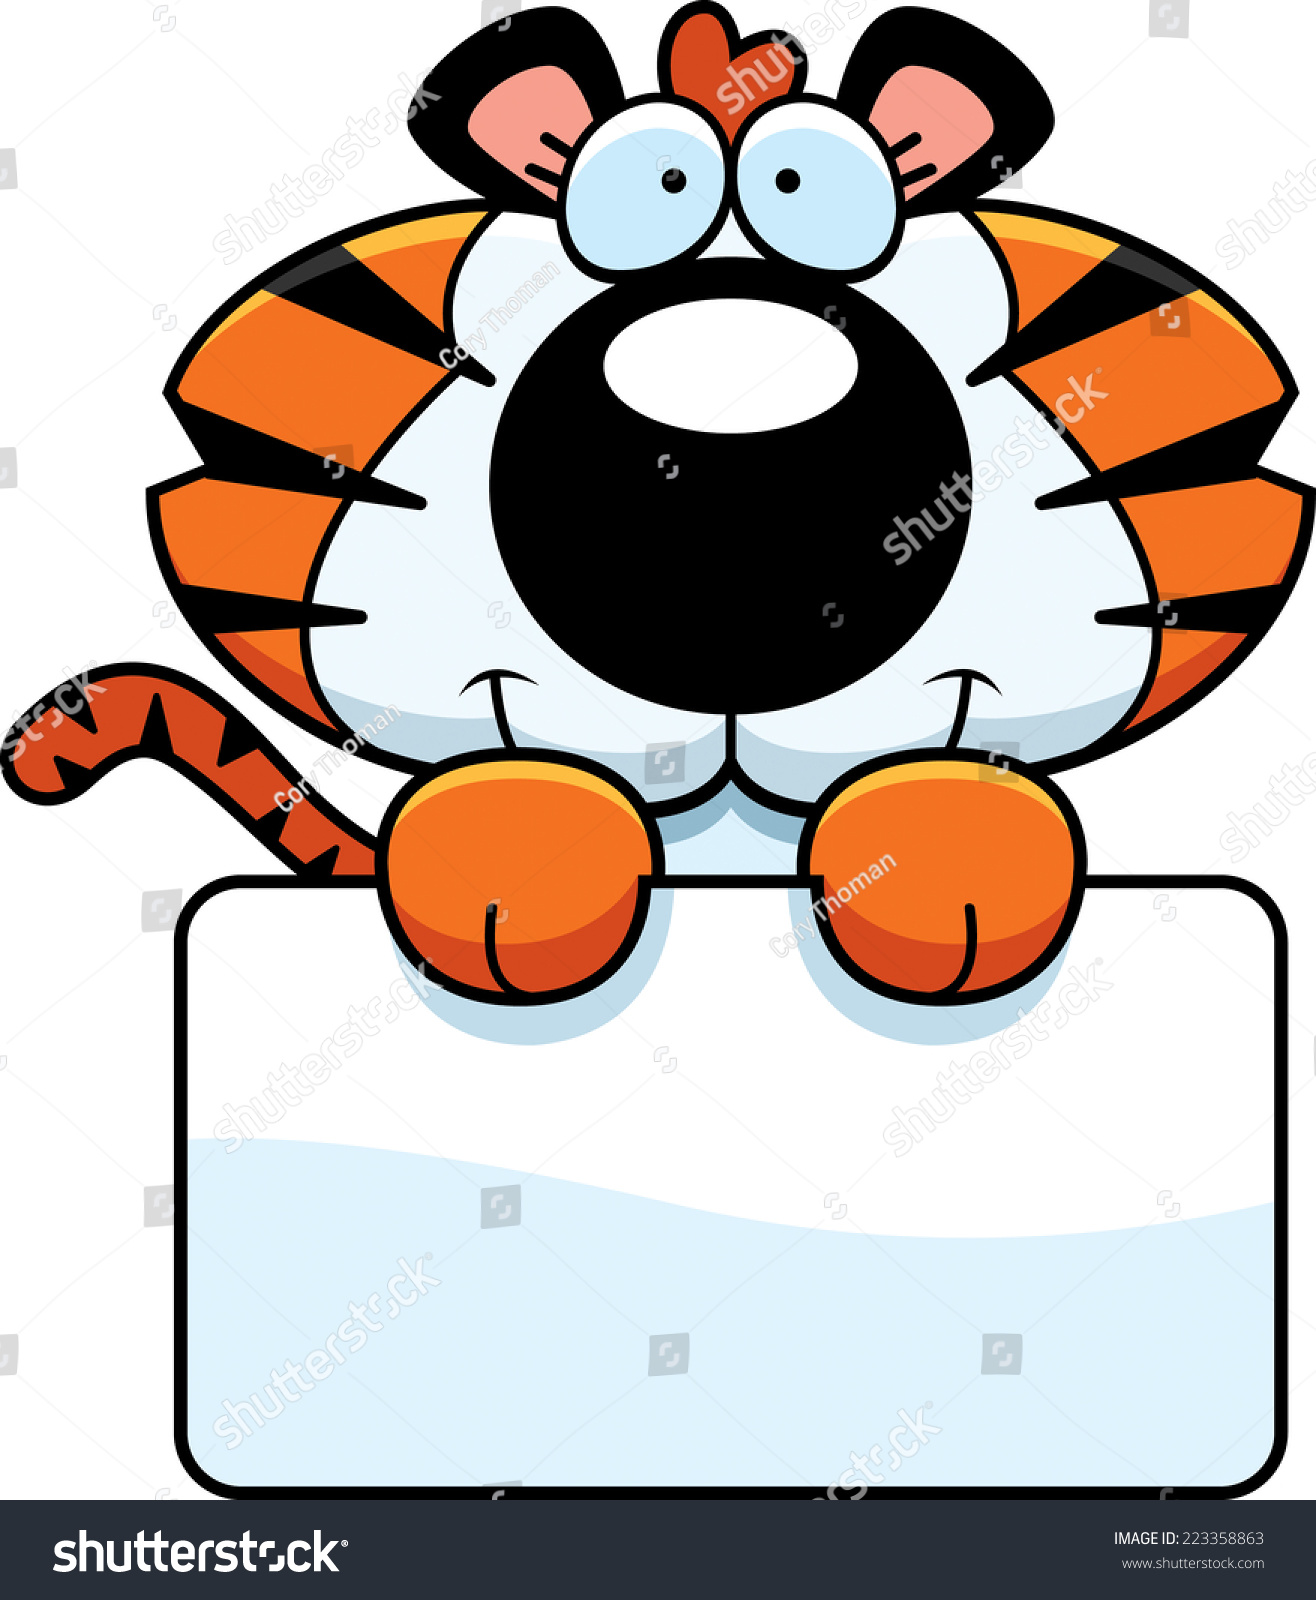 A Cartoon Illustration Of A Tiger Cub With A Royalty Free Stock Vector 223358863 5305